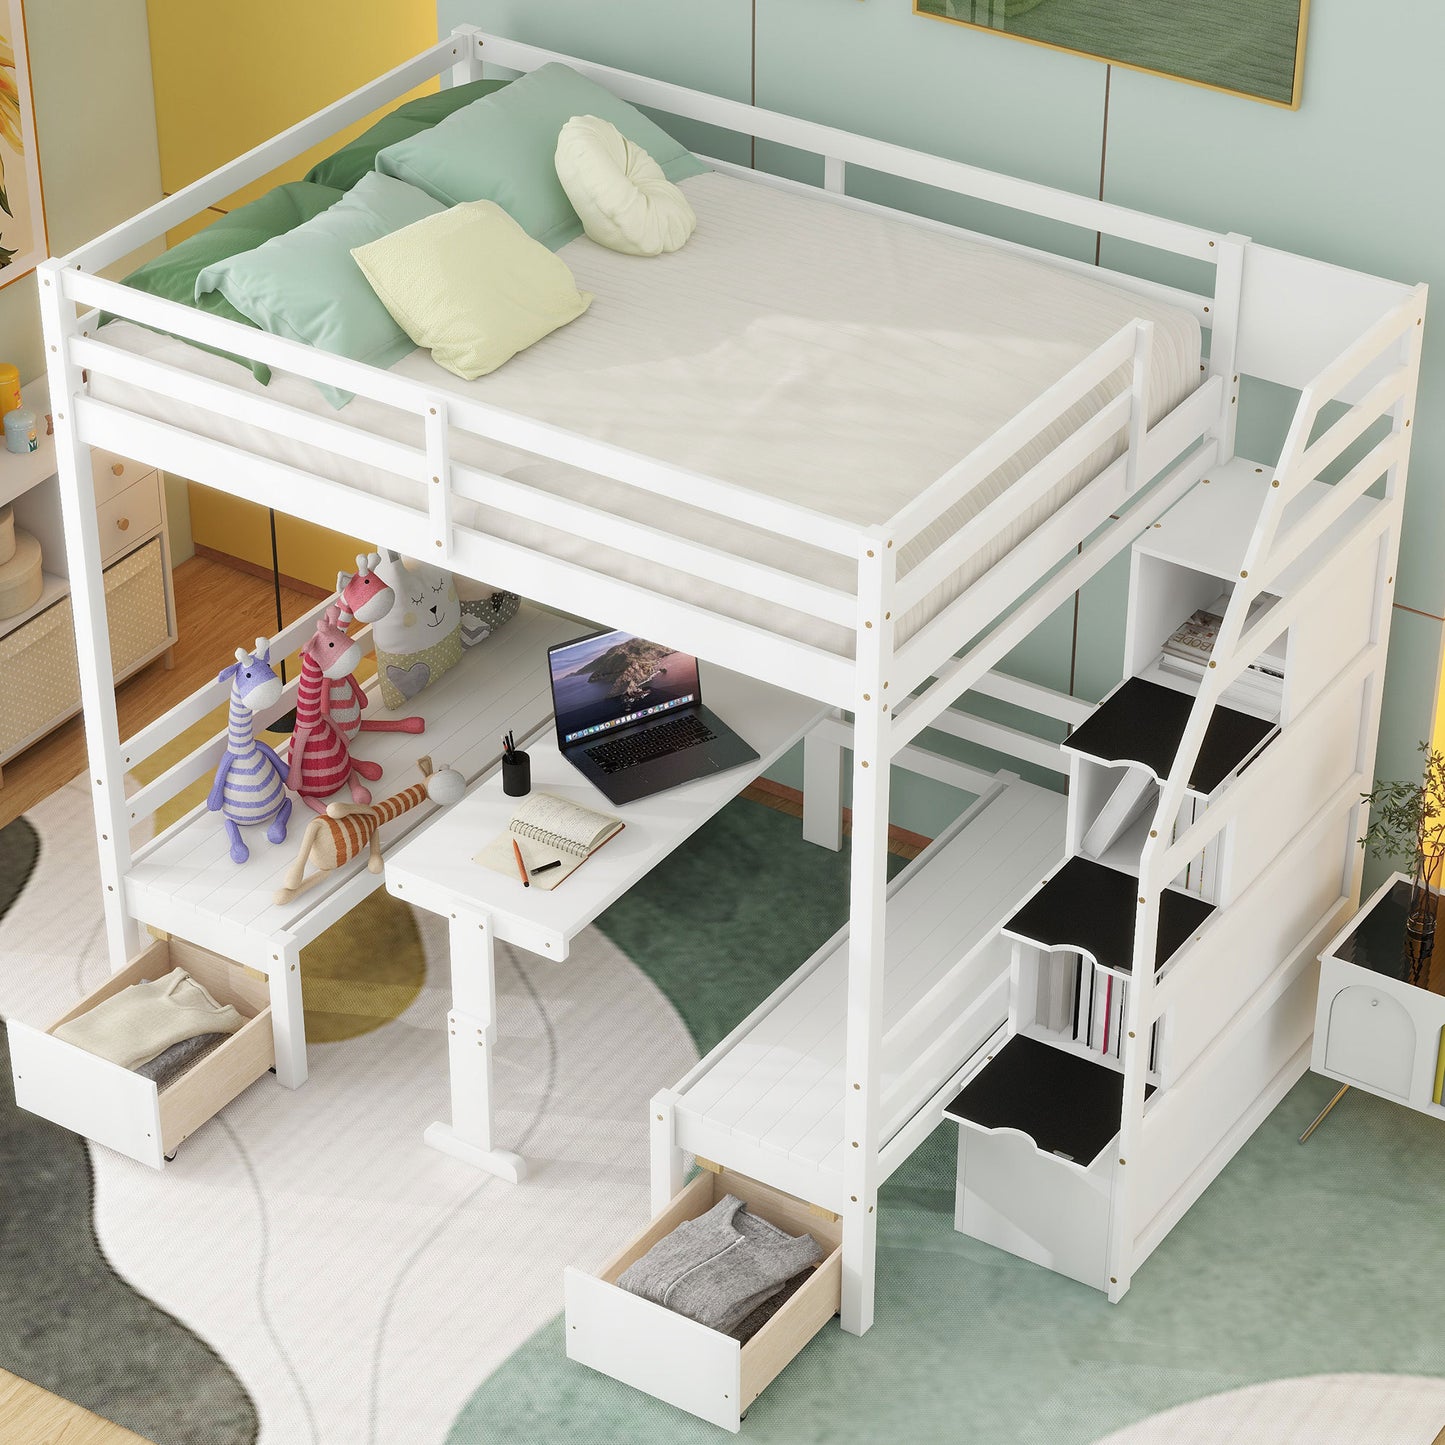 Full over Full Size Bunk with staircase,the Down Bed can be Convertible to Seats and Table Set,White